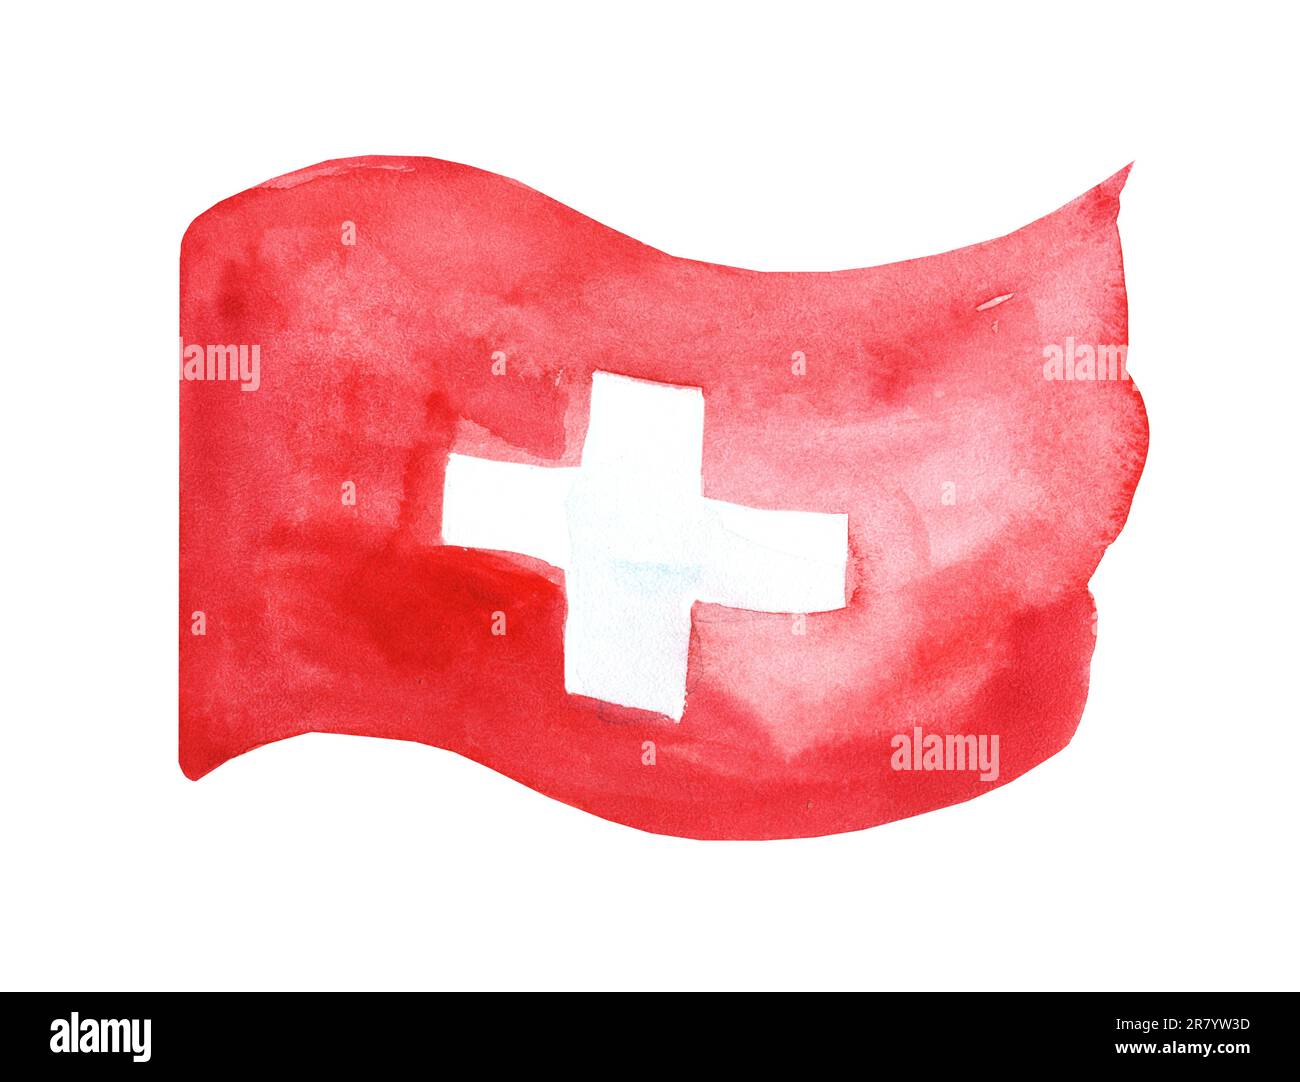 Watercolor illustration. Switzerland flag isolated on a white background. Red, white, red flag. State symbol Stock Photo